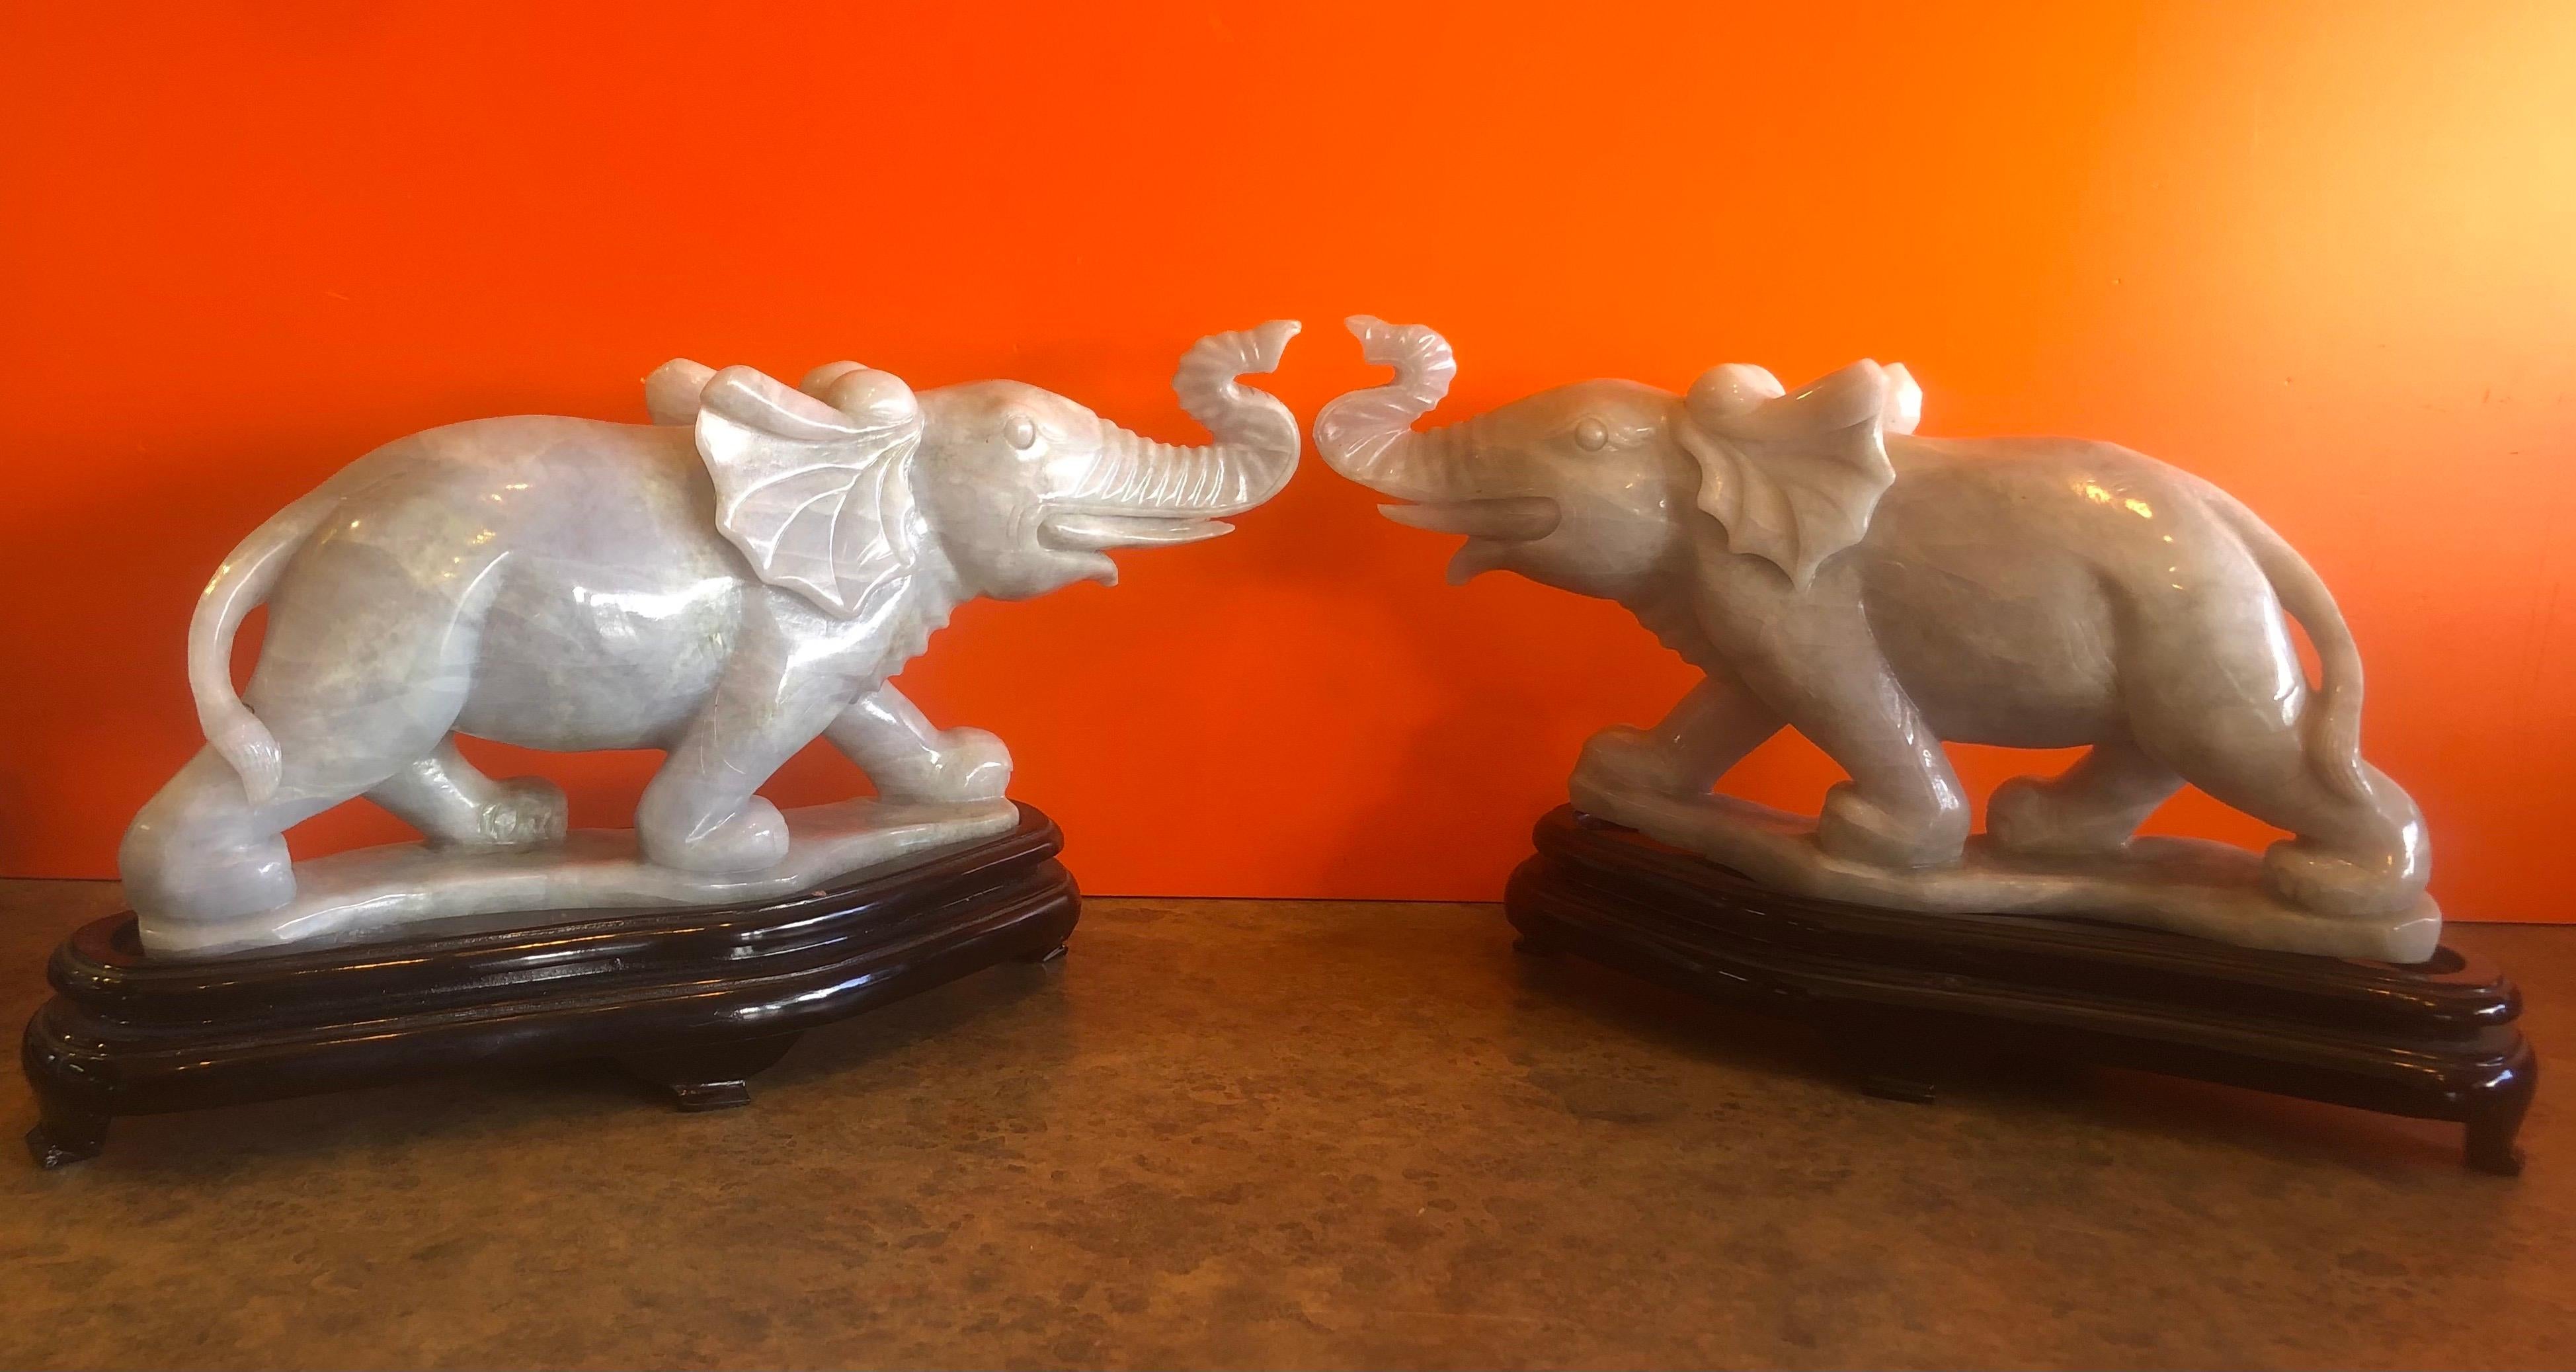 Gorgeous pair of hand carved white jade elephant sculptures on bases, circa 1960s. Impressive detail and a stunning high gloss finish with deep veining. The set is in excellent condition with no chips or cracks. Each elephant measures: 13